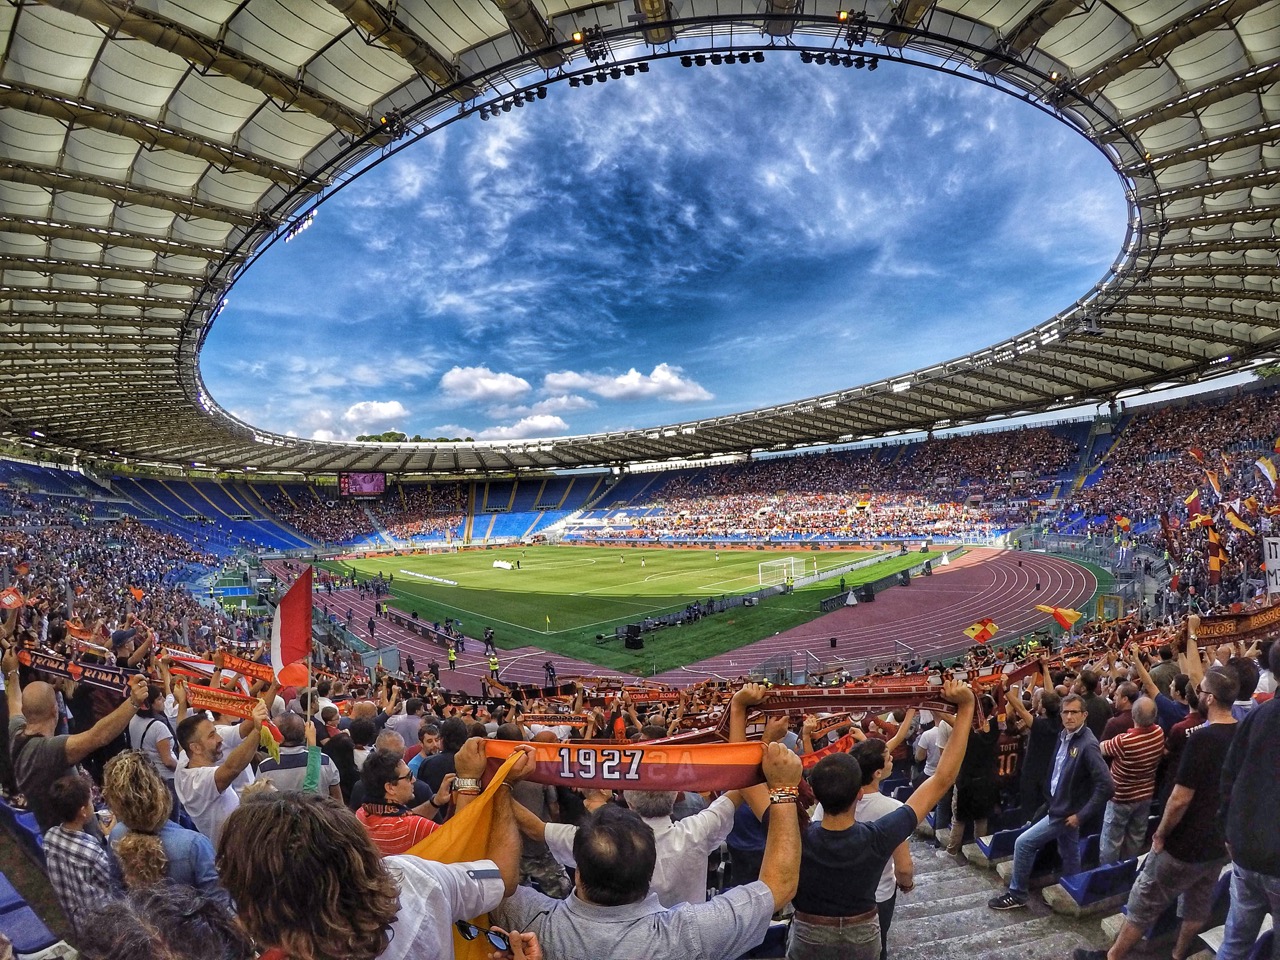 A stadium with 0 roof:Image by Marco Pomella from Pixabay REF 2791693